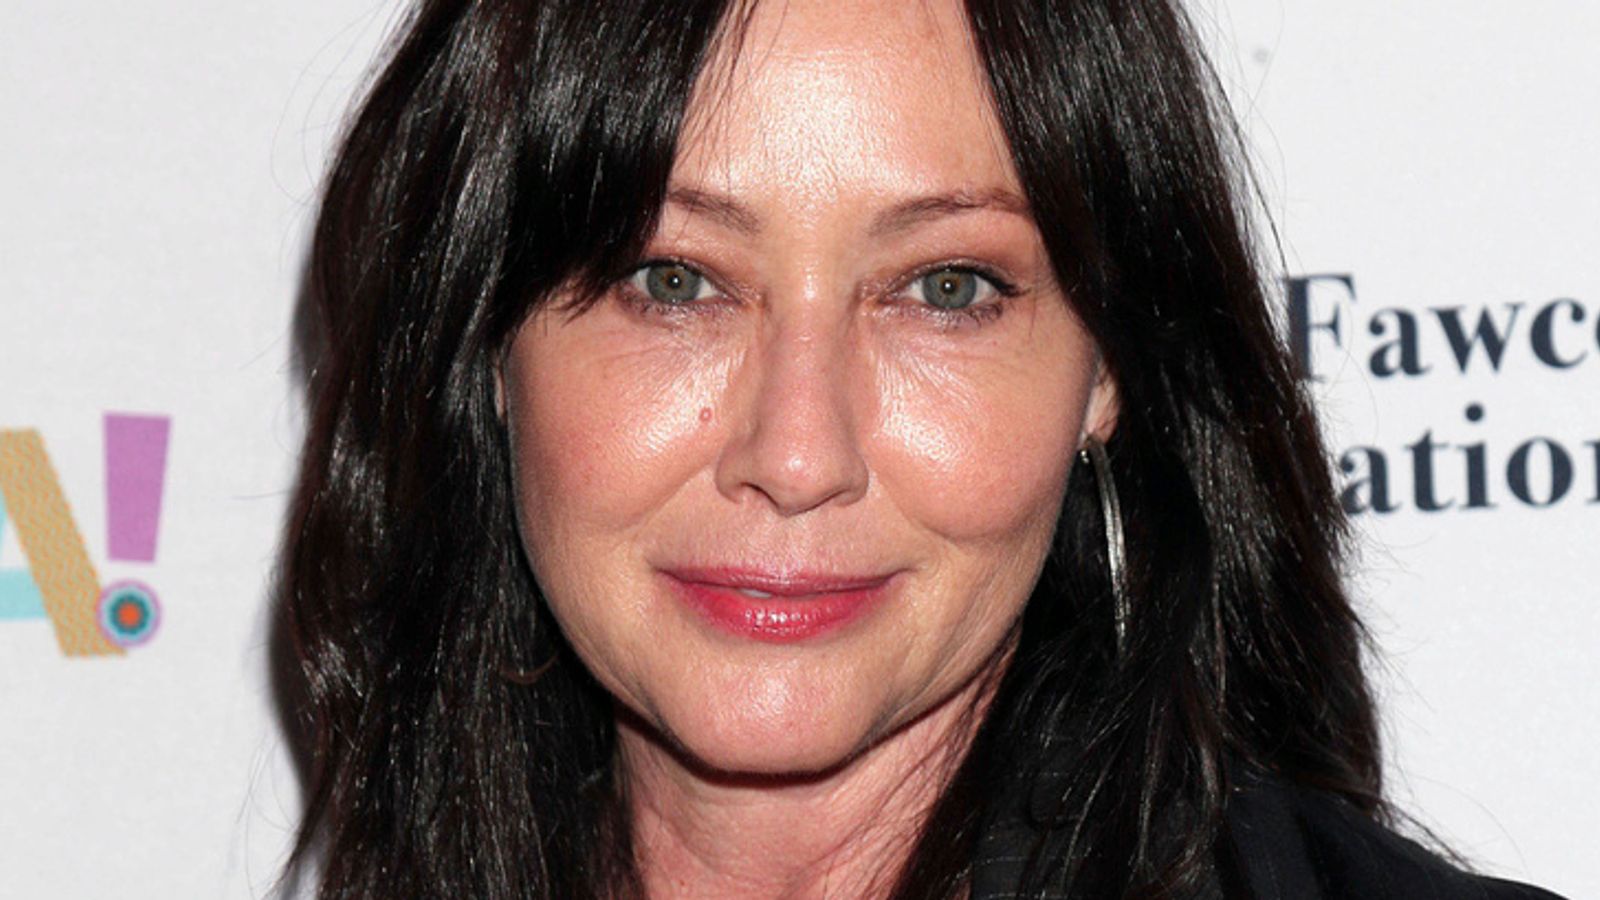 Shannen Doherty says breast cancer has spread to her bones - Sky News